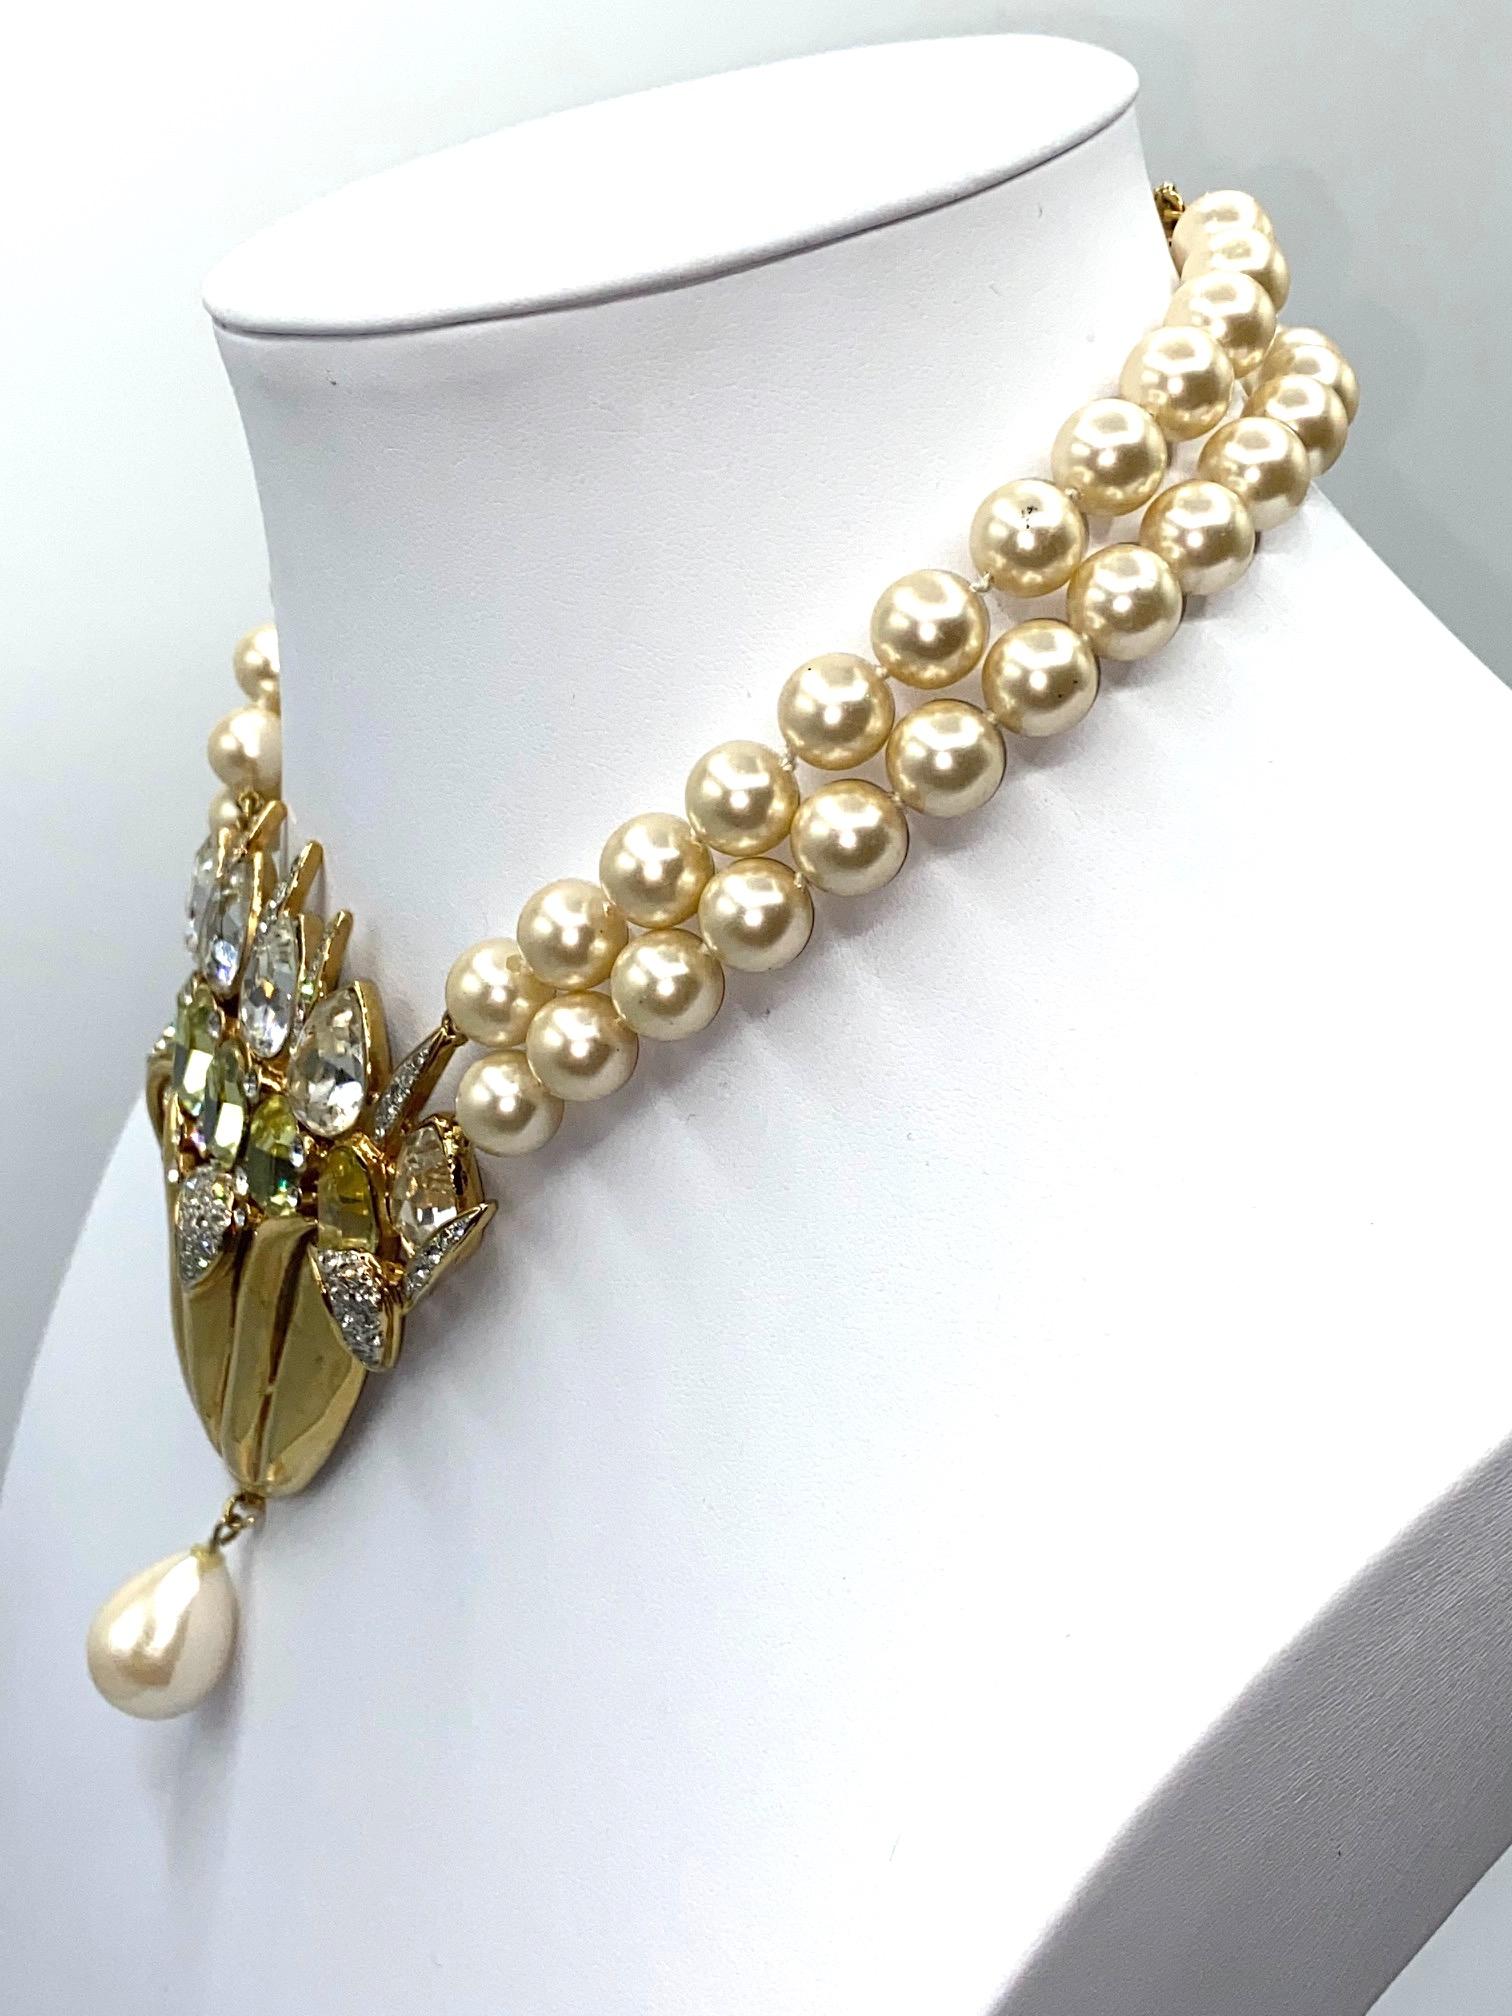 Women's Valentino 1980s Pearl Necklace with Gold & Rhinestone Flower Center Piece